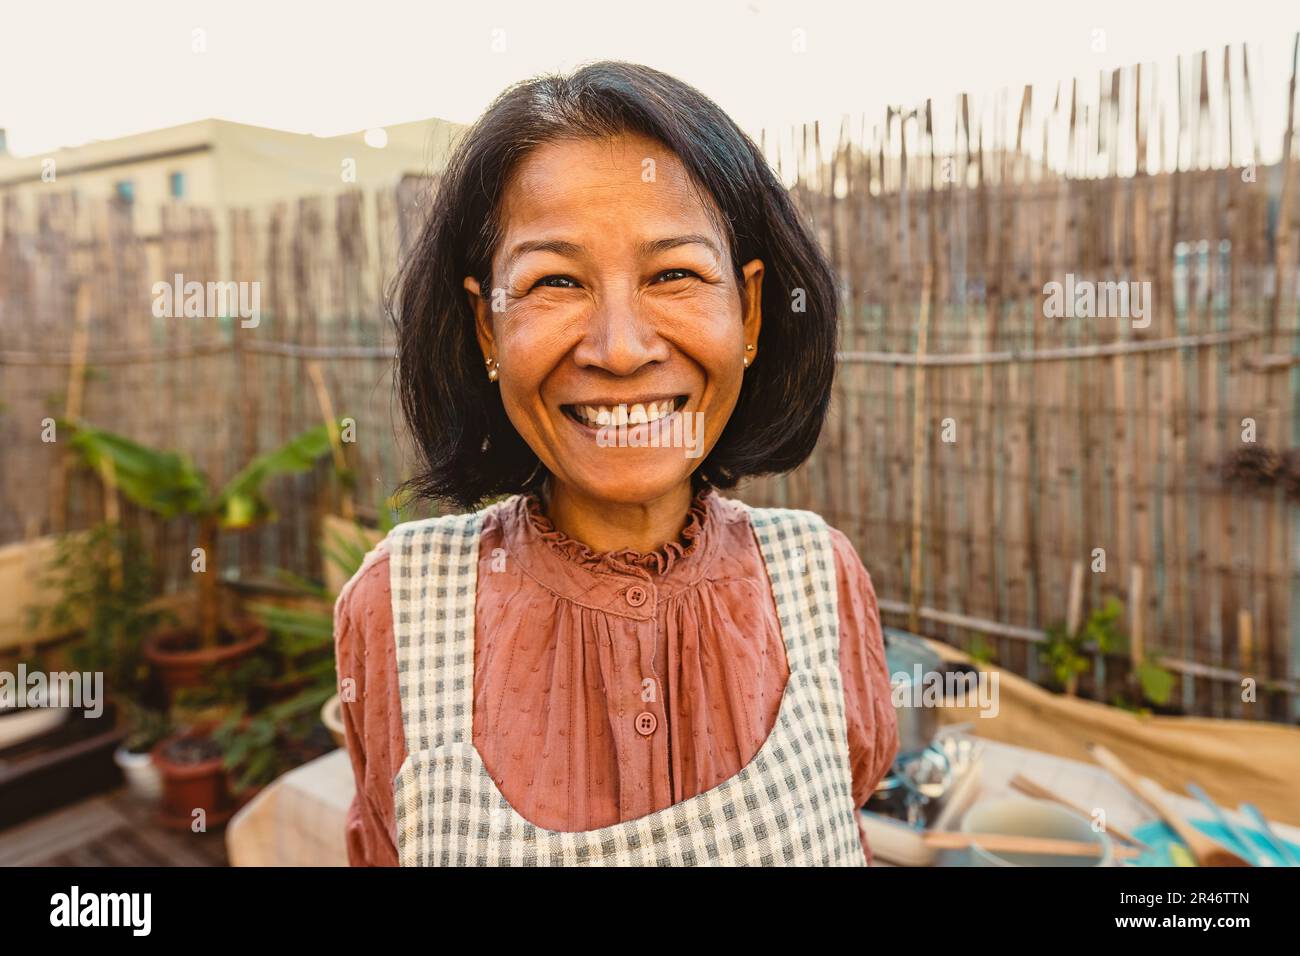 Happy Thai woman having fun smiling in front of camera while preparing food recipe at house patio Stock Photo